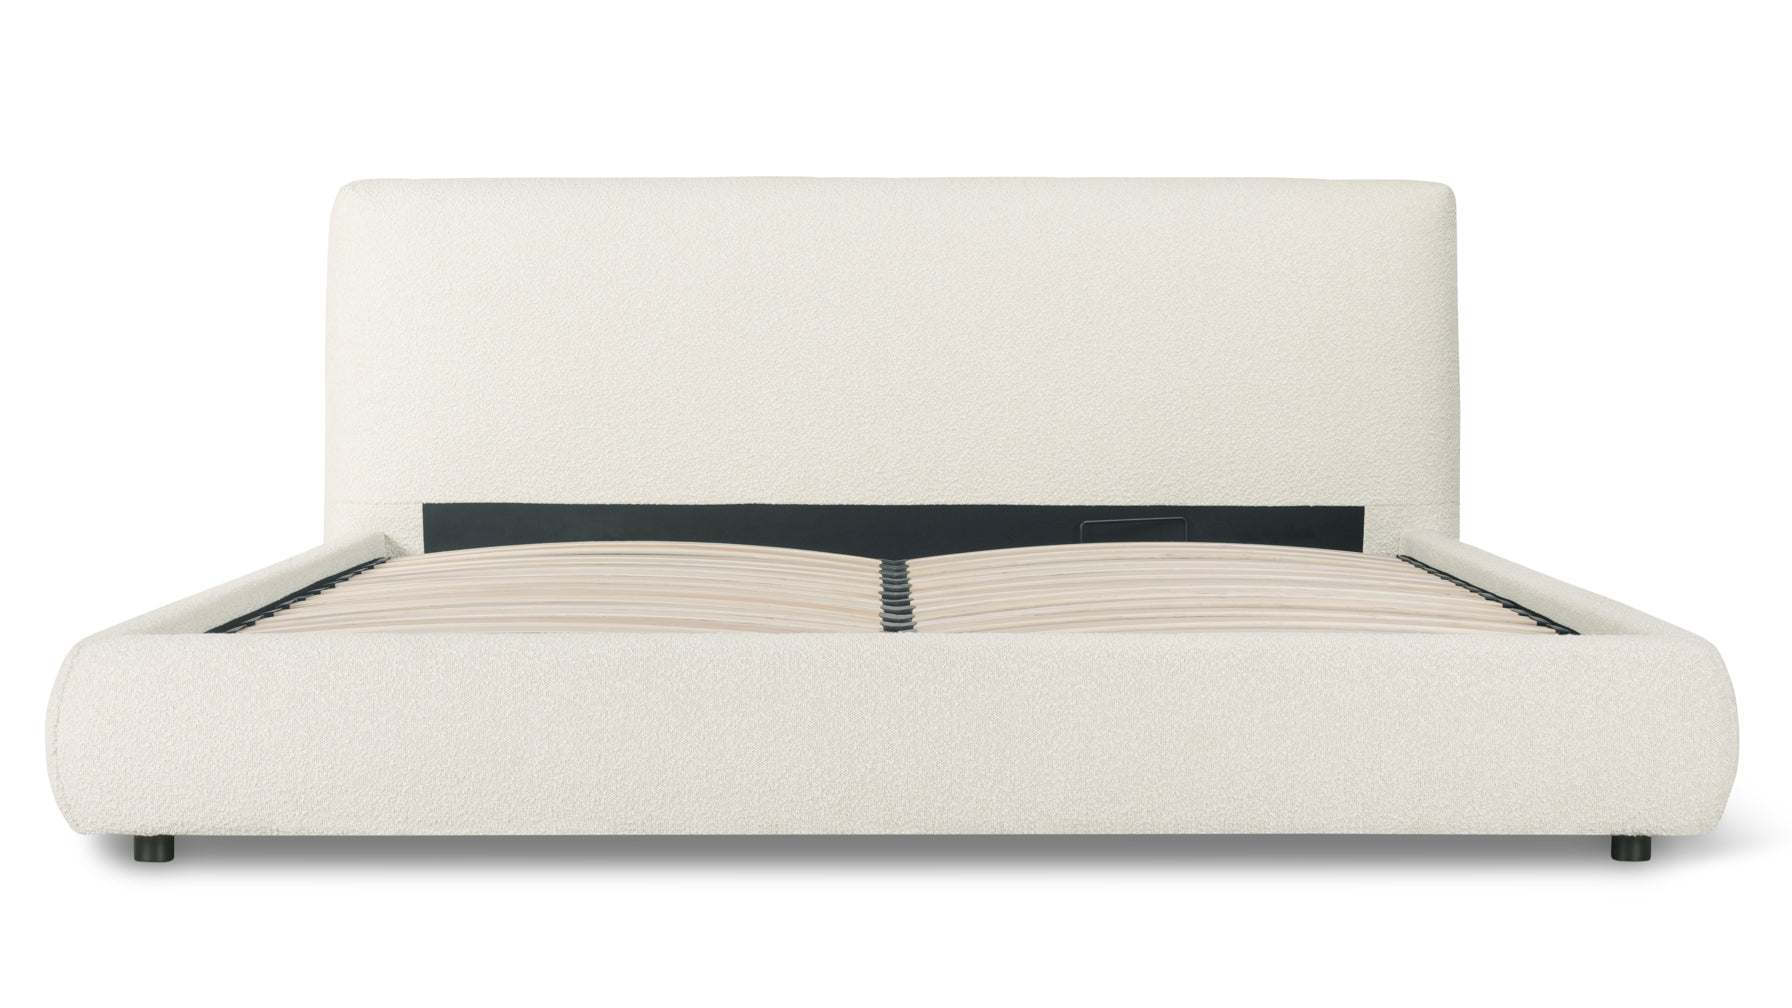 Dream Bed With Storage, Queen, Cream Boucle - Image 6